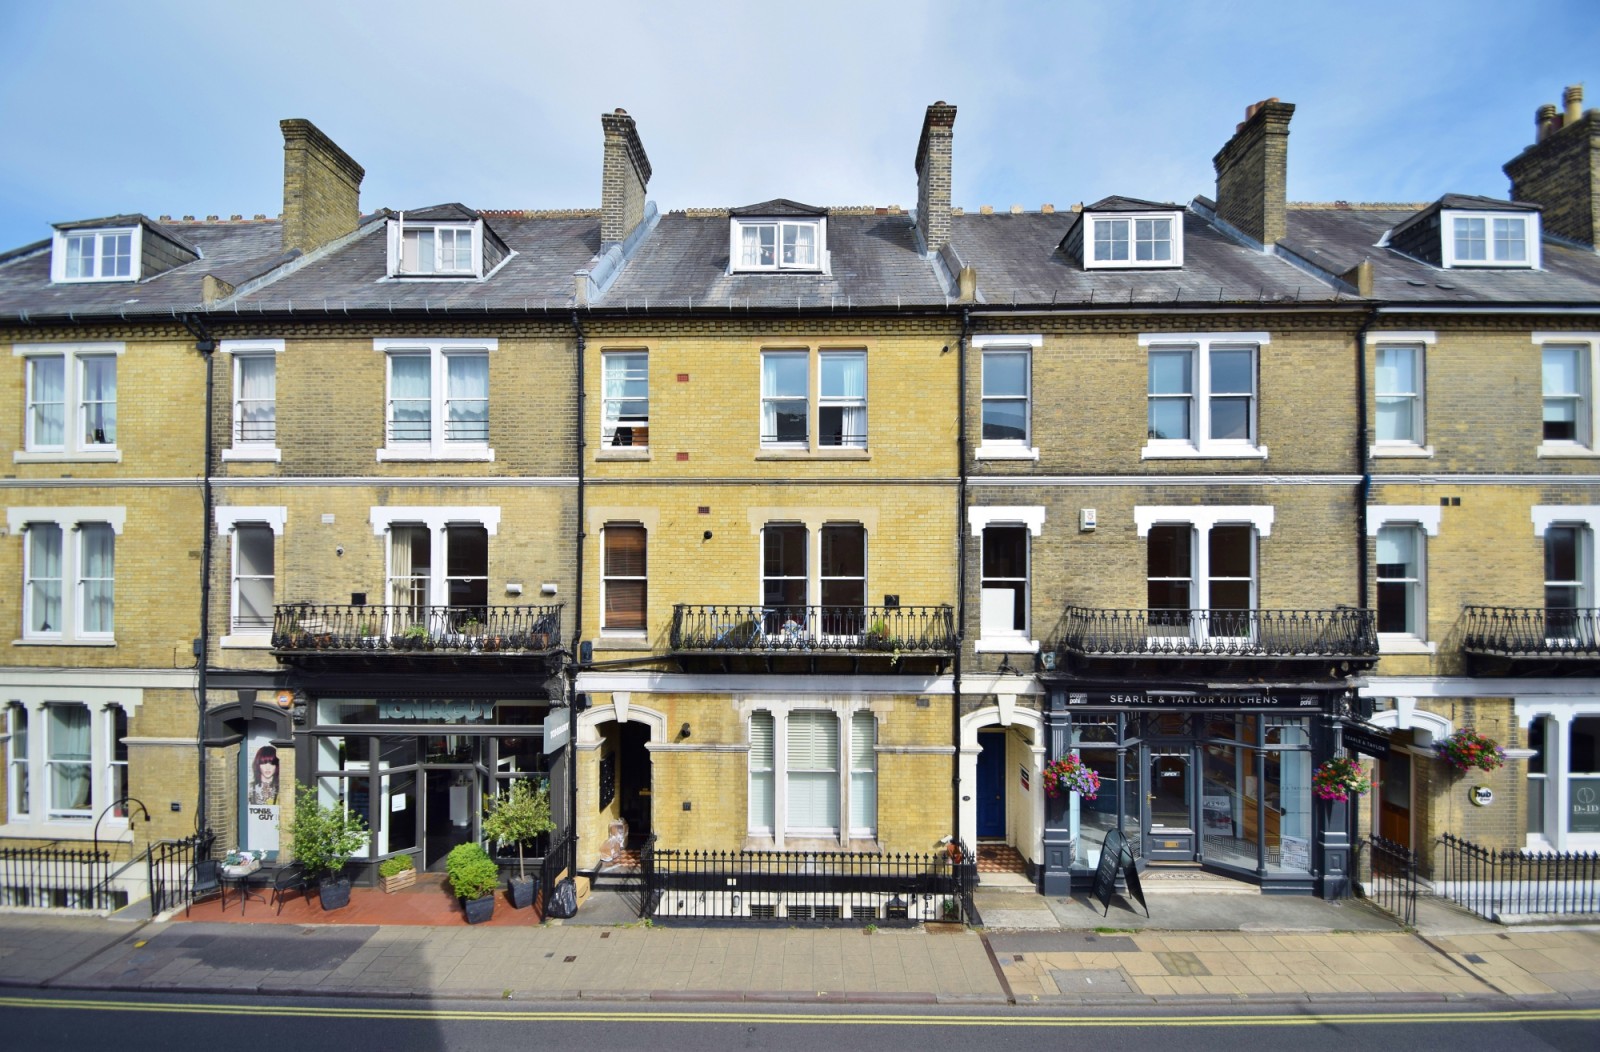 Flat 10, 17 Southgate Street, Winchester SO23 9AA